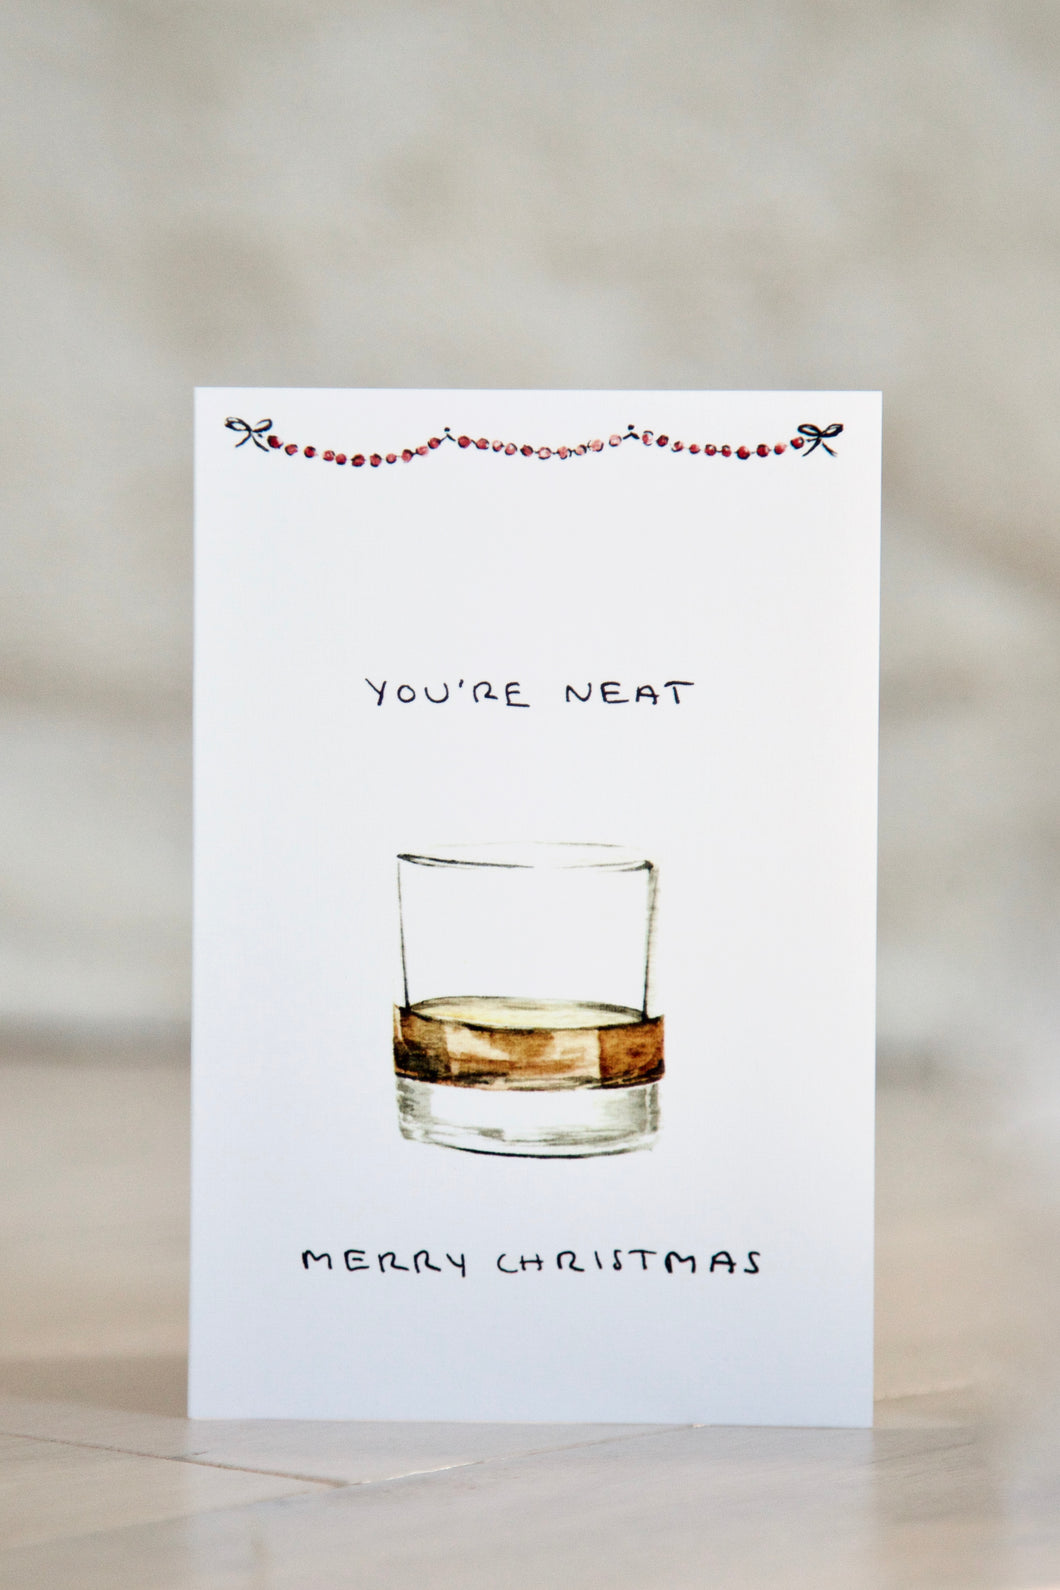 You're Neat, Merry Christmas - Whiskey / Rum / Bourbon Christmas Card